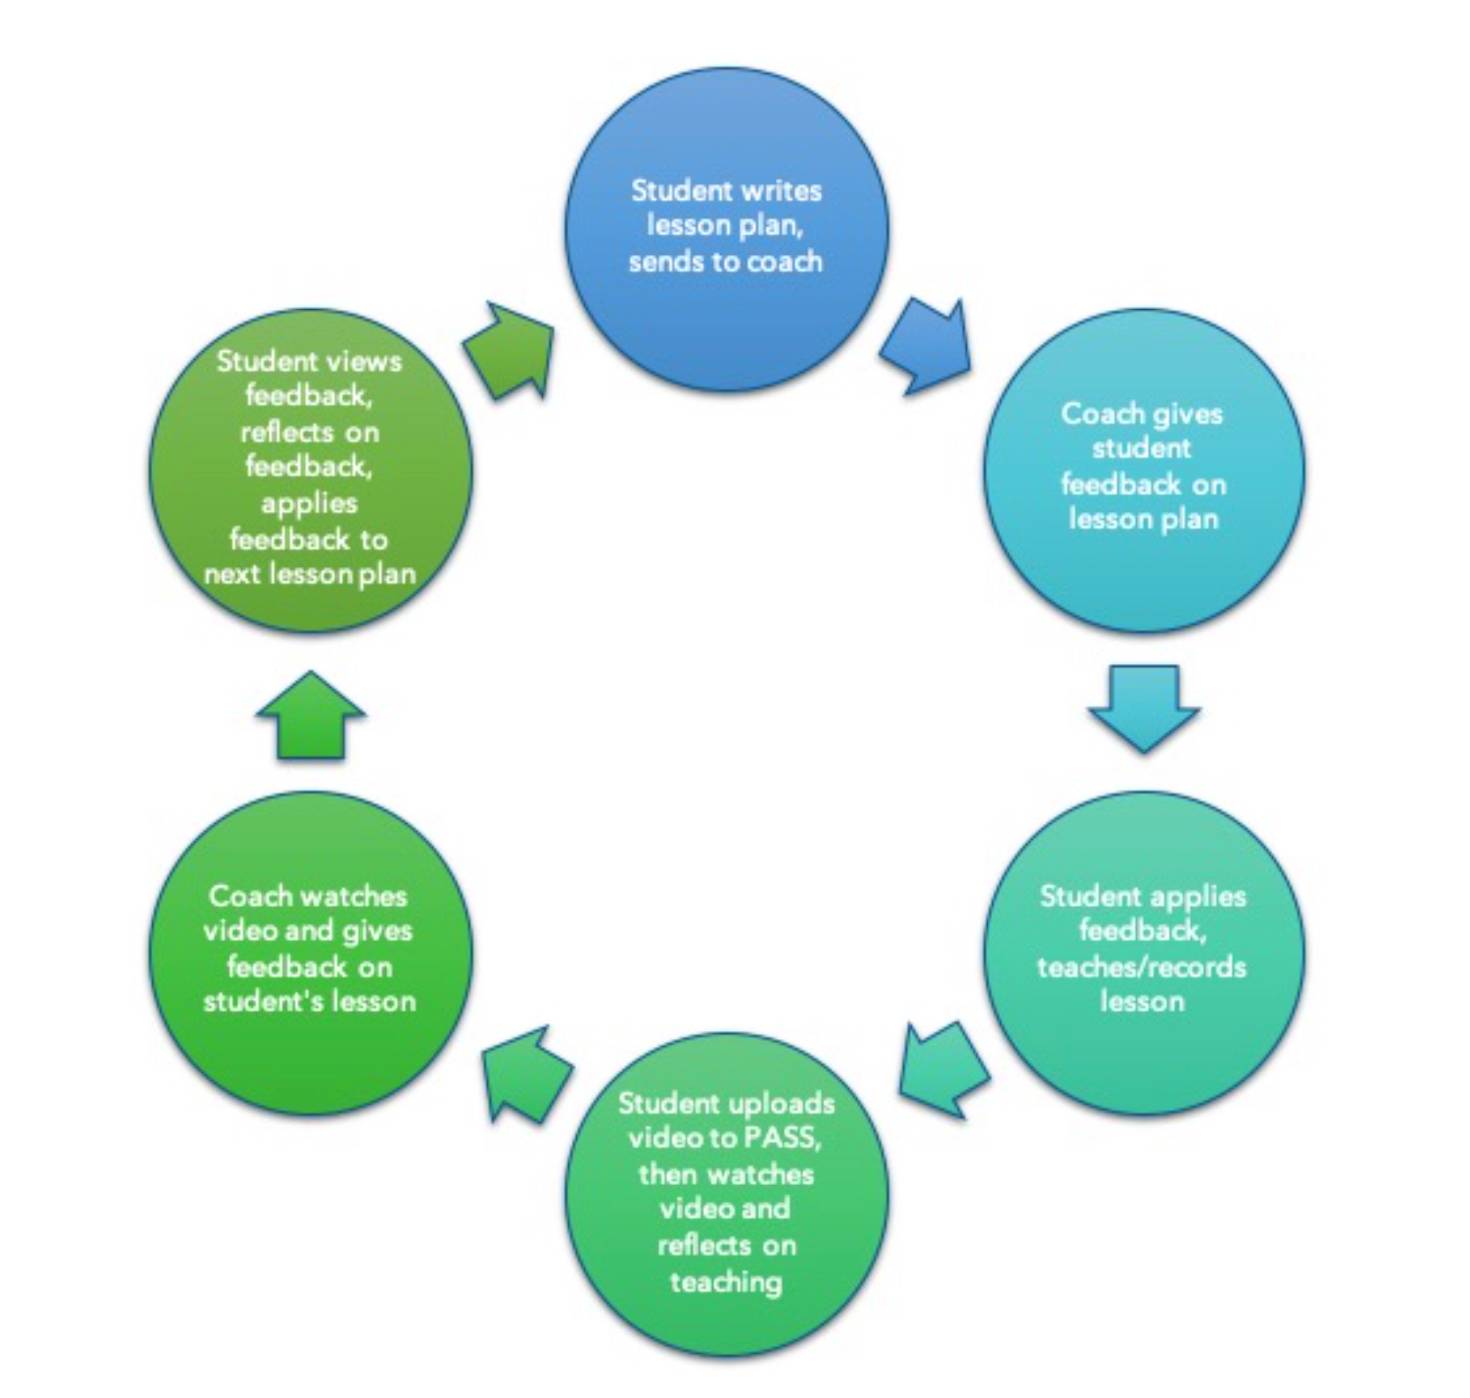 Infographic showing a circle made up of six smaller circles. Each smaller circle details a step in a process. Arrow icons are placed clockwise from step to step, with no stopping point, as the cycle repeats. The points are: Student writes lesson plan and sends to coach; Coach gives student feedback on lesson plan; Student applies feedback then teaches and/or records lesson; Student uploads video to PASS, then watches video and reflects on teaching; Coach watches video and gives feedback on student’s lesson; and Student views feedback, reflects on feedback, and applies feedback to next lesson plan. 